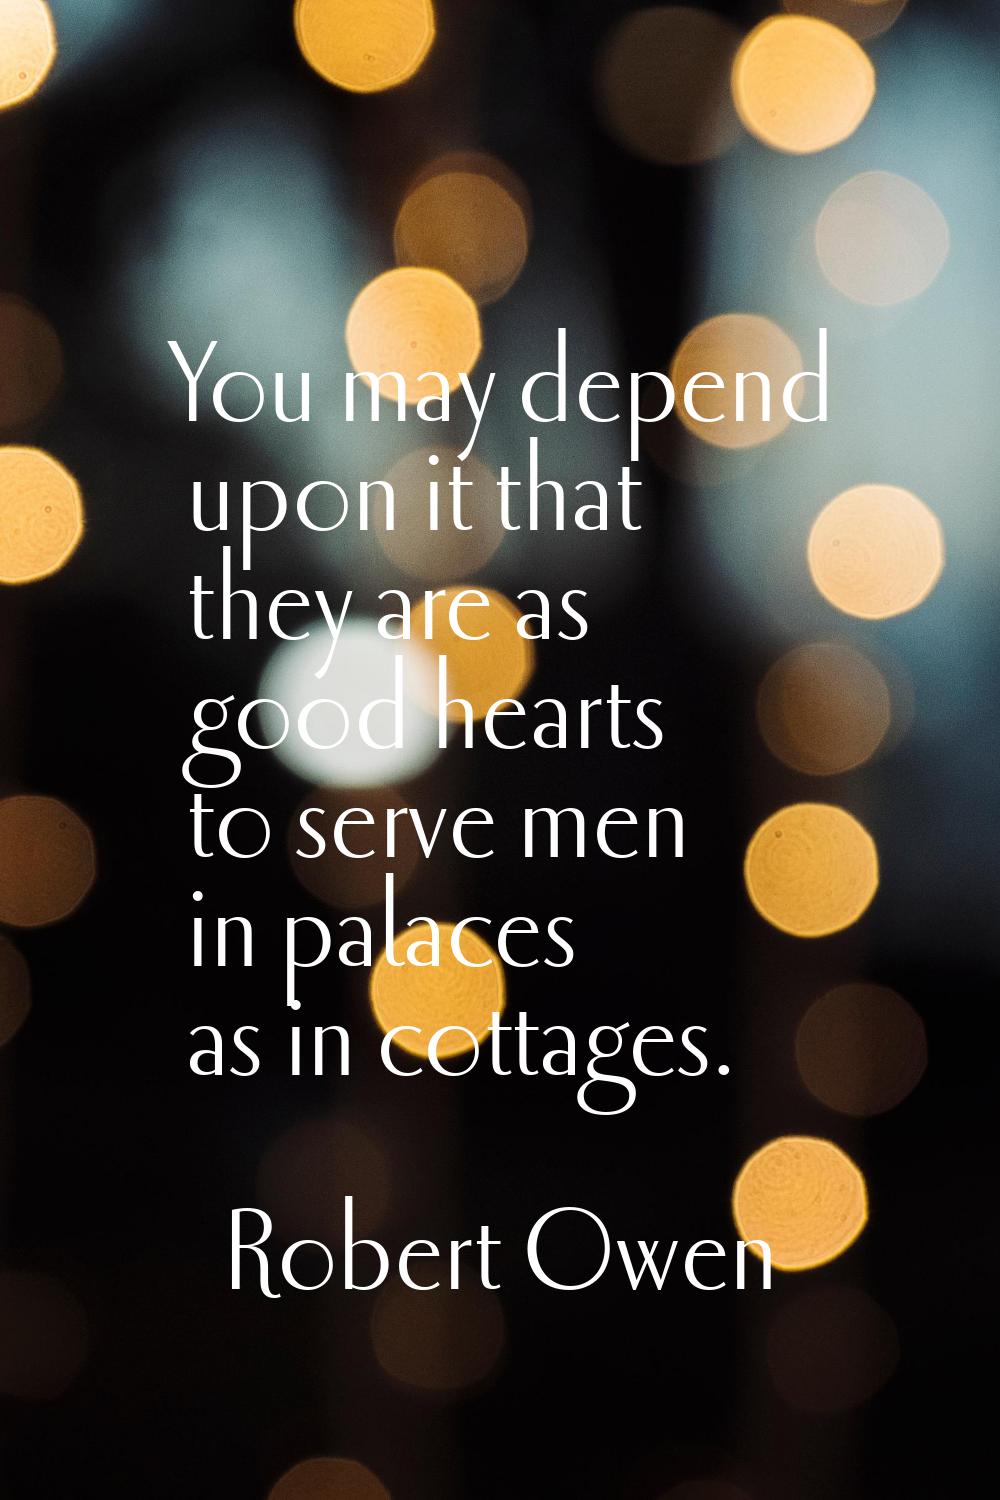 You may depend upon it that they are as good hearts to serve men in palaces as in cottages.